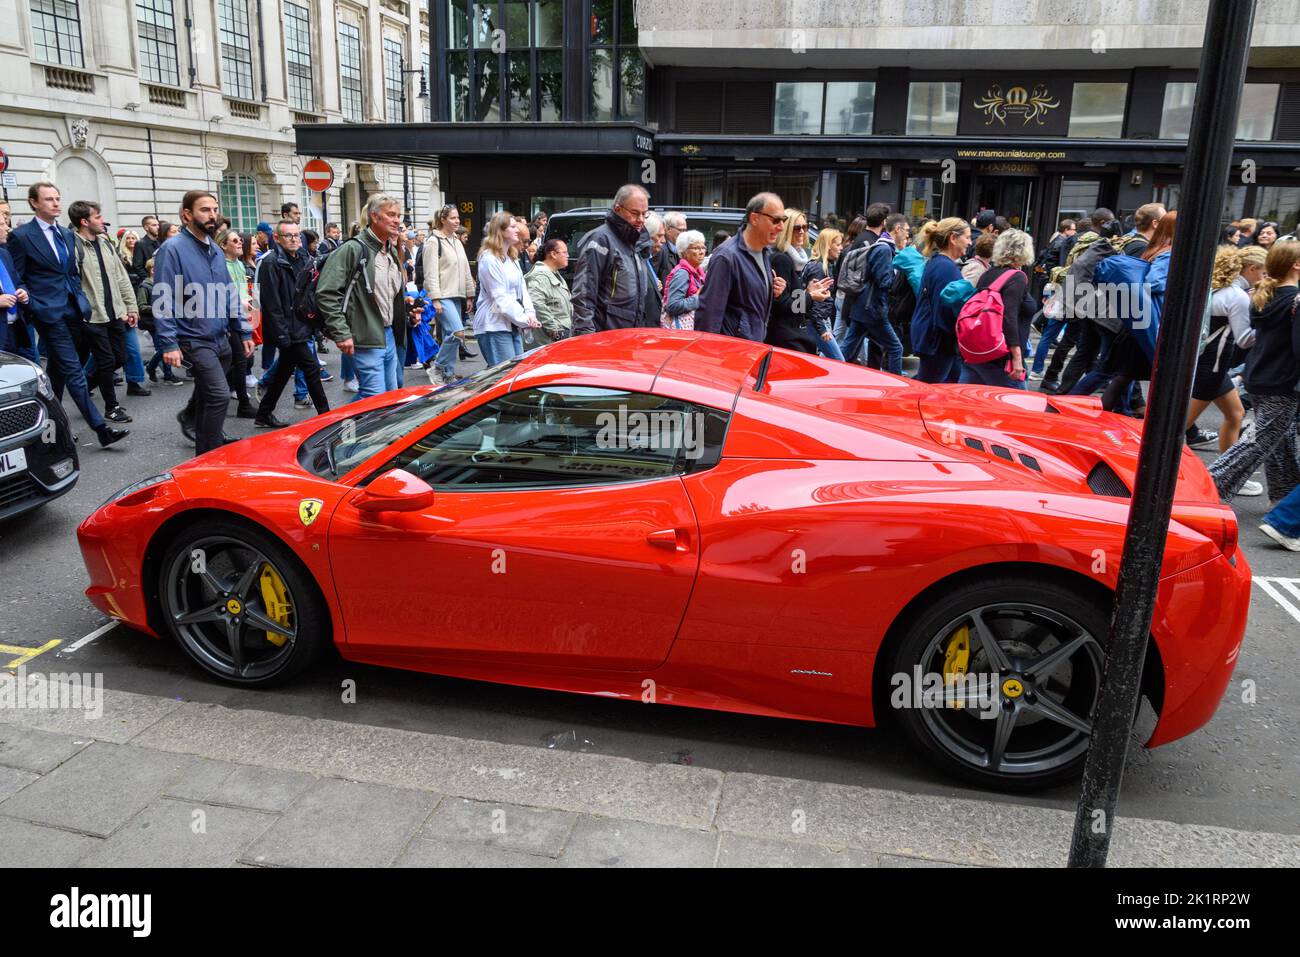 Crowds of people heading to Hyde Park for Queen Elizabeth II funeral screening pass a red Ferrari on Curzon Street, 19th September 2022, London, UK Stock Photo